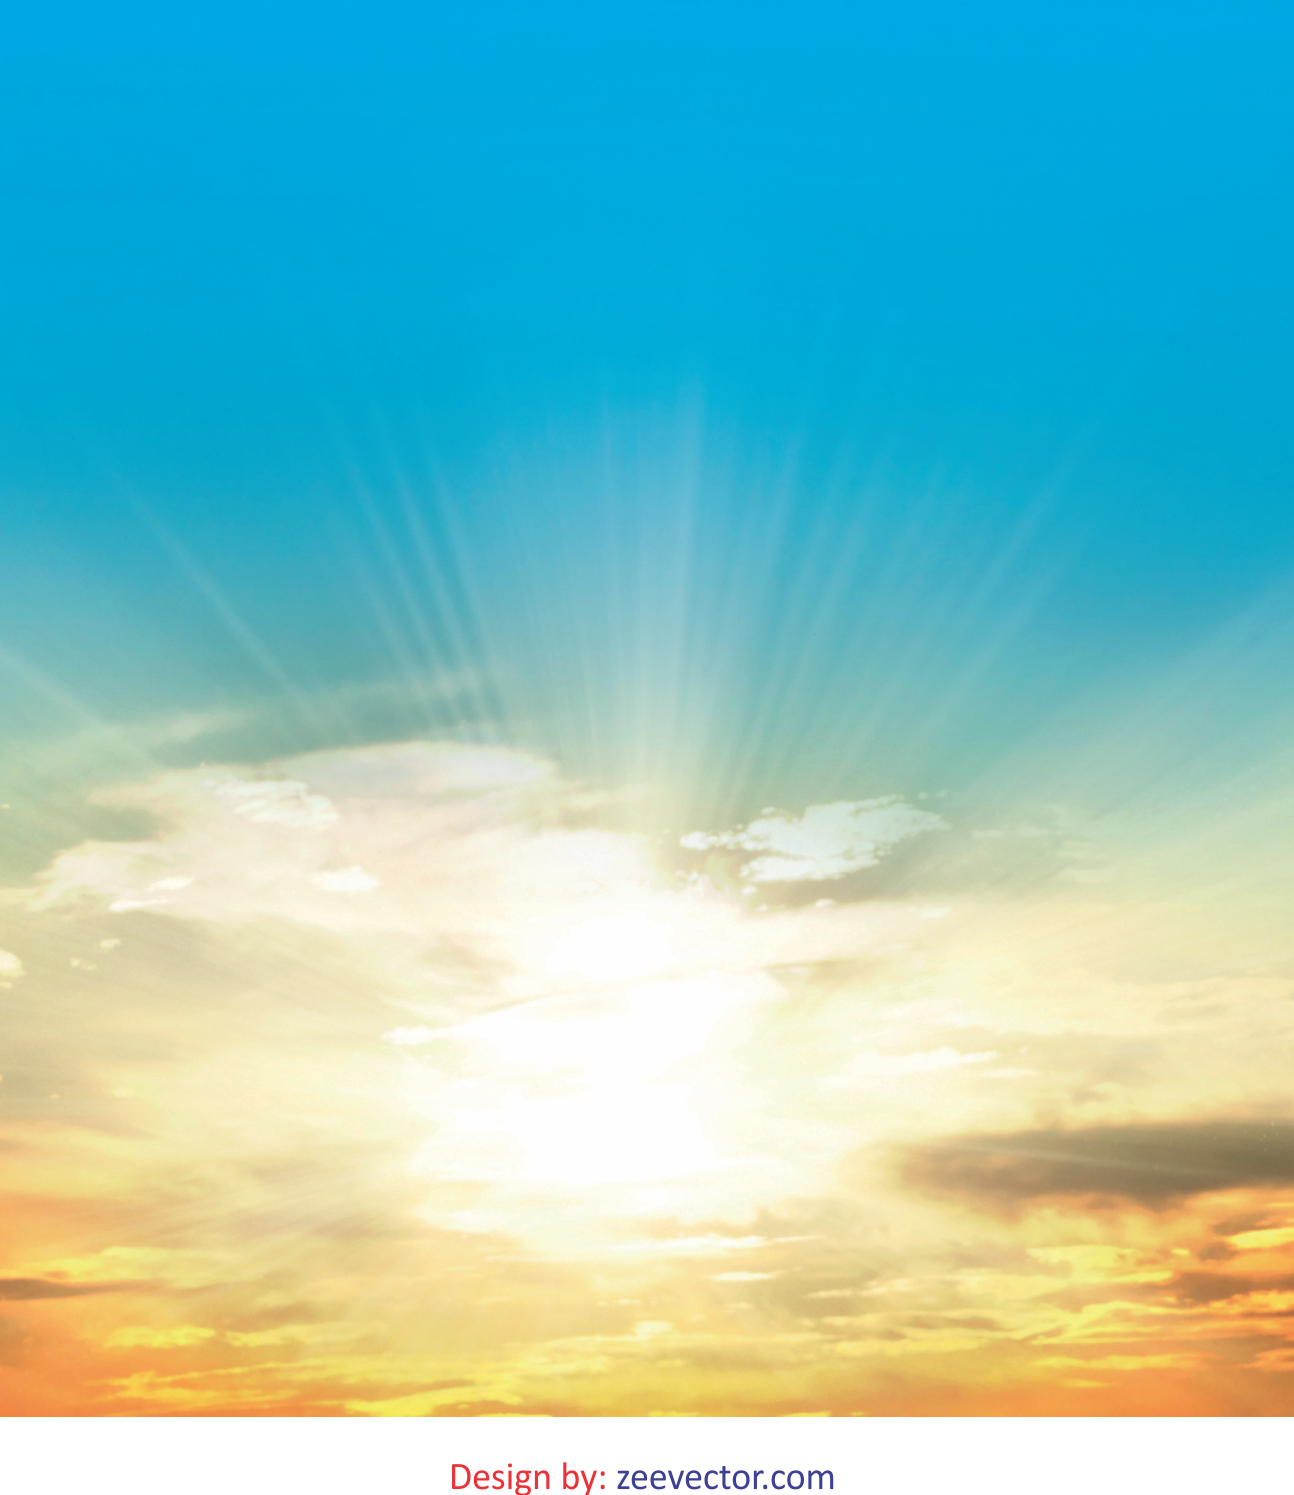 Sunrise Background HD - FREE Vector Design - Cdr, Ai, EPS, PNG, SVG